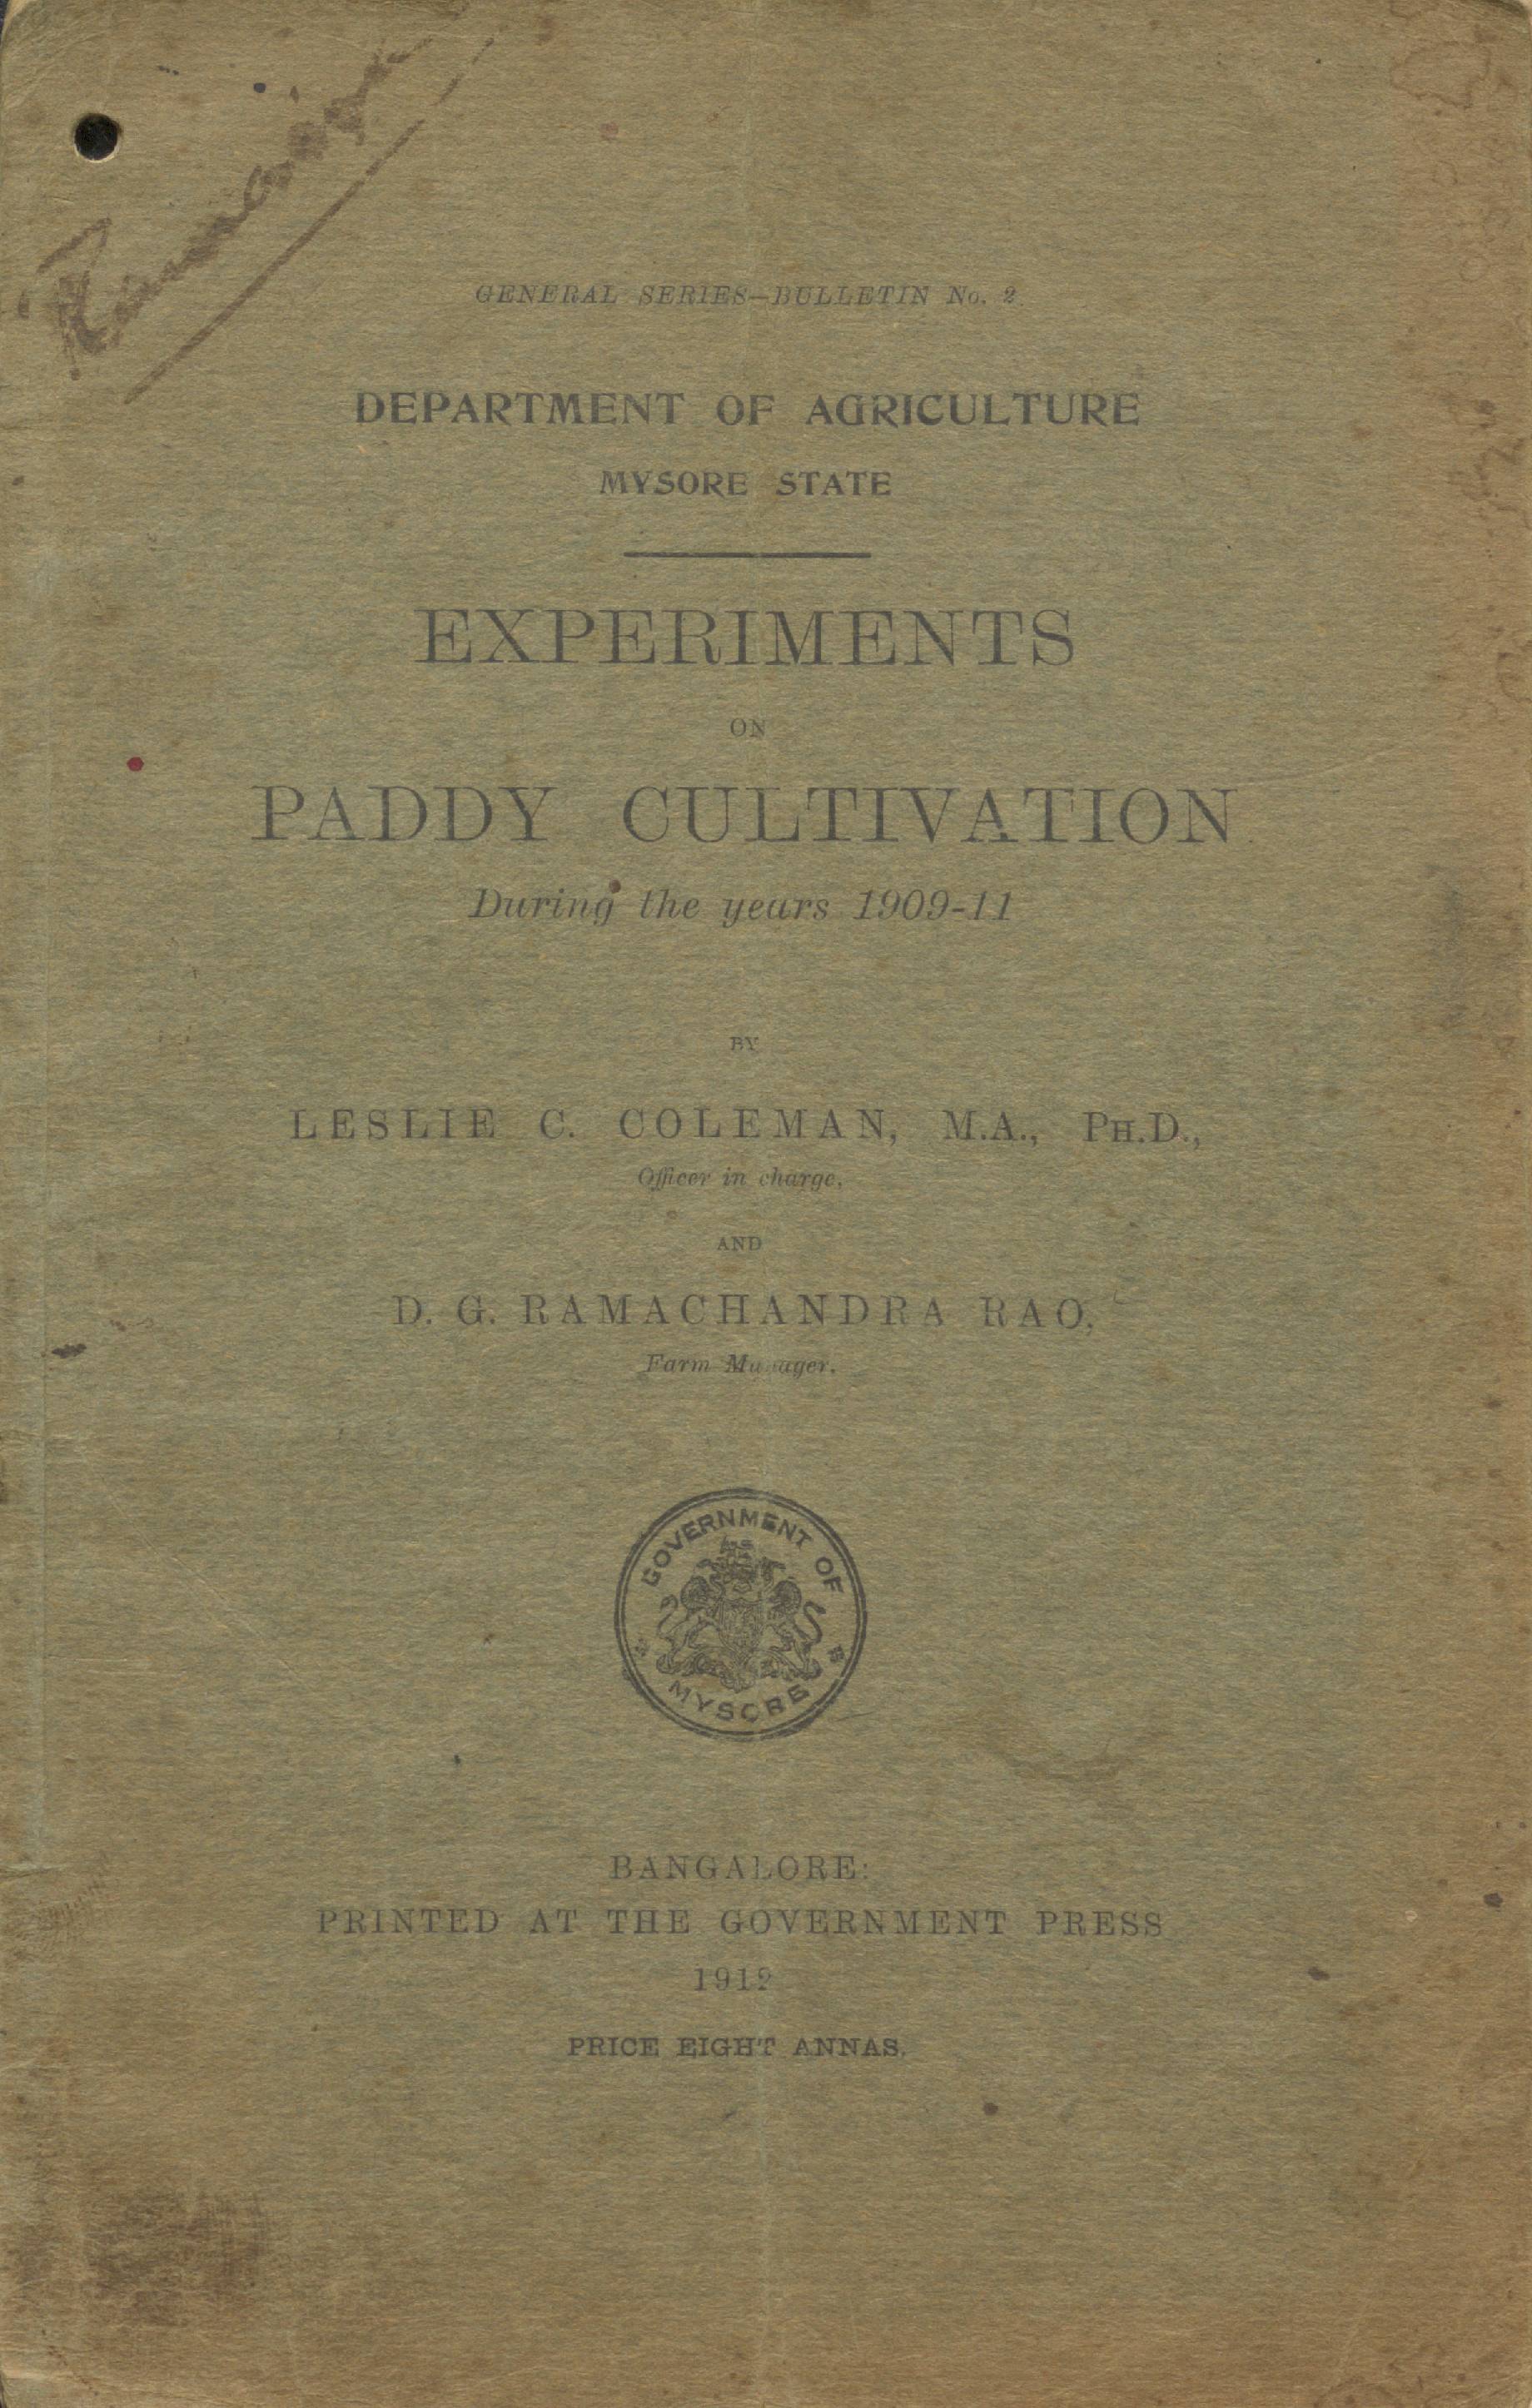  Experiments on Paddy Cultivation during the years 1909-11